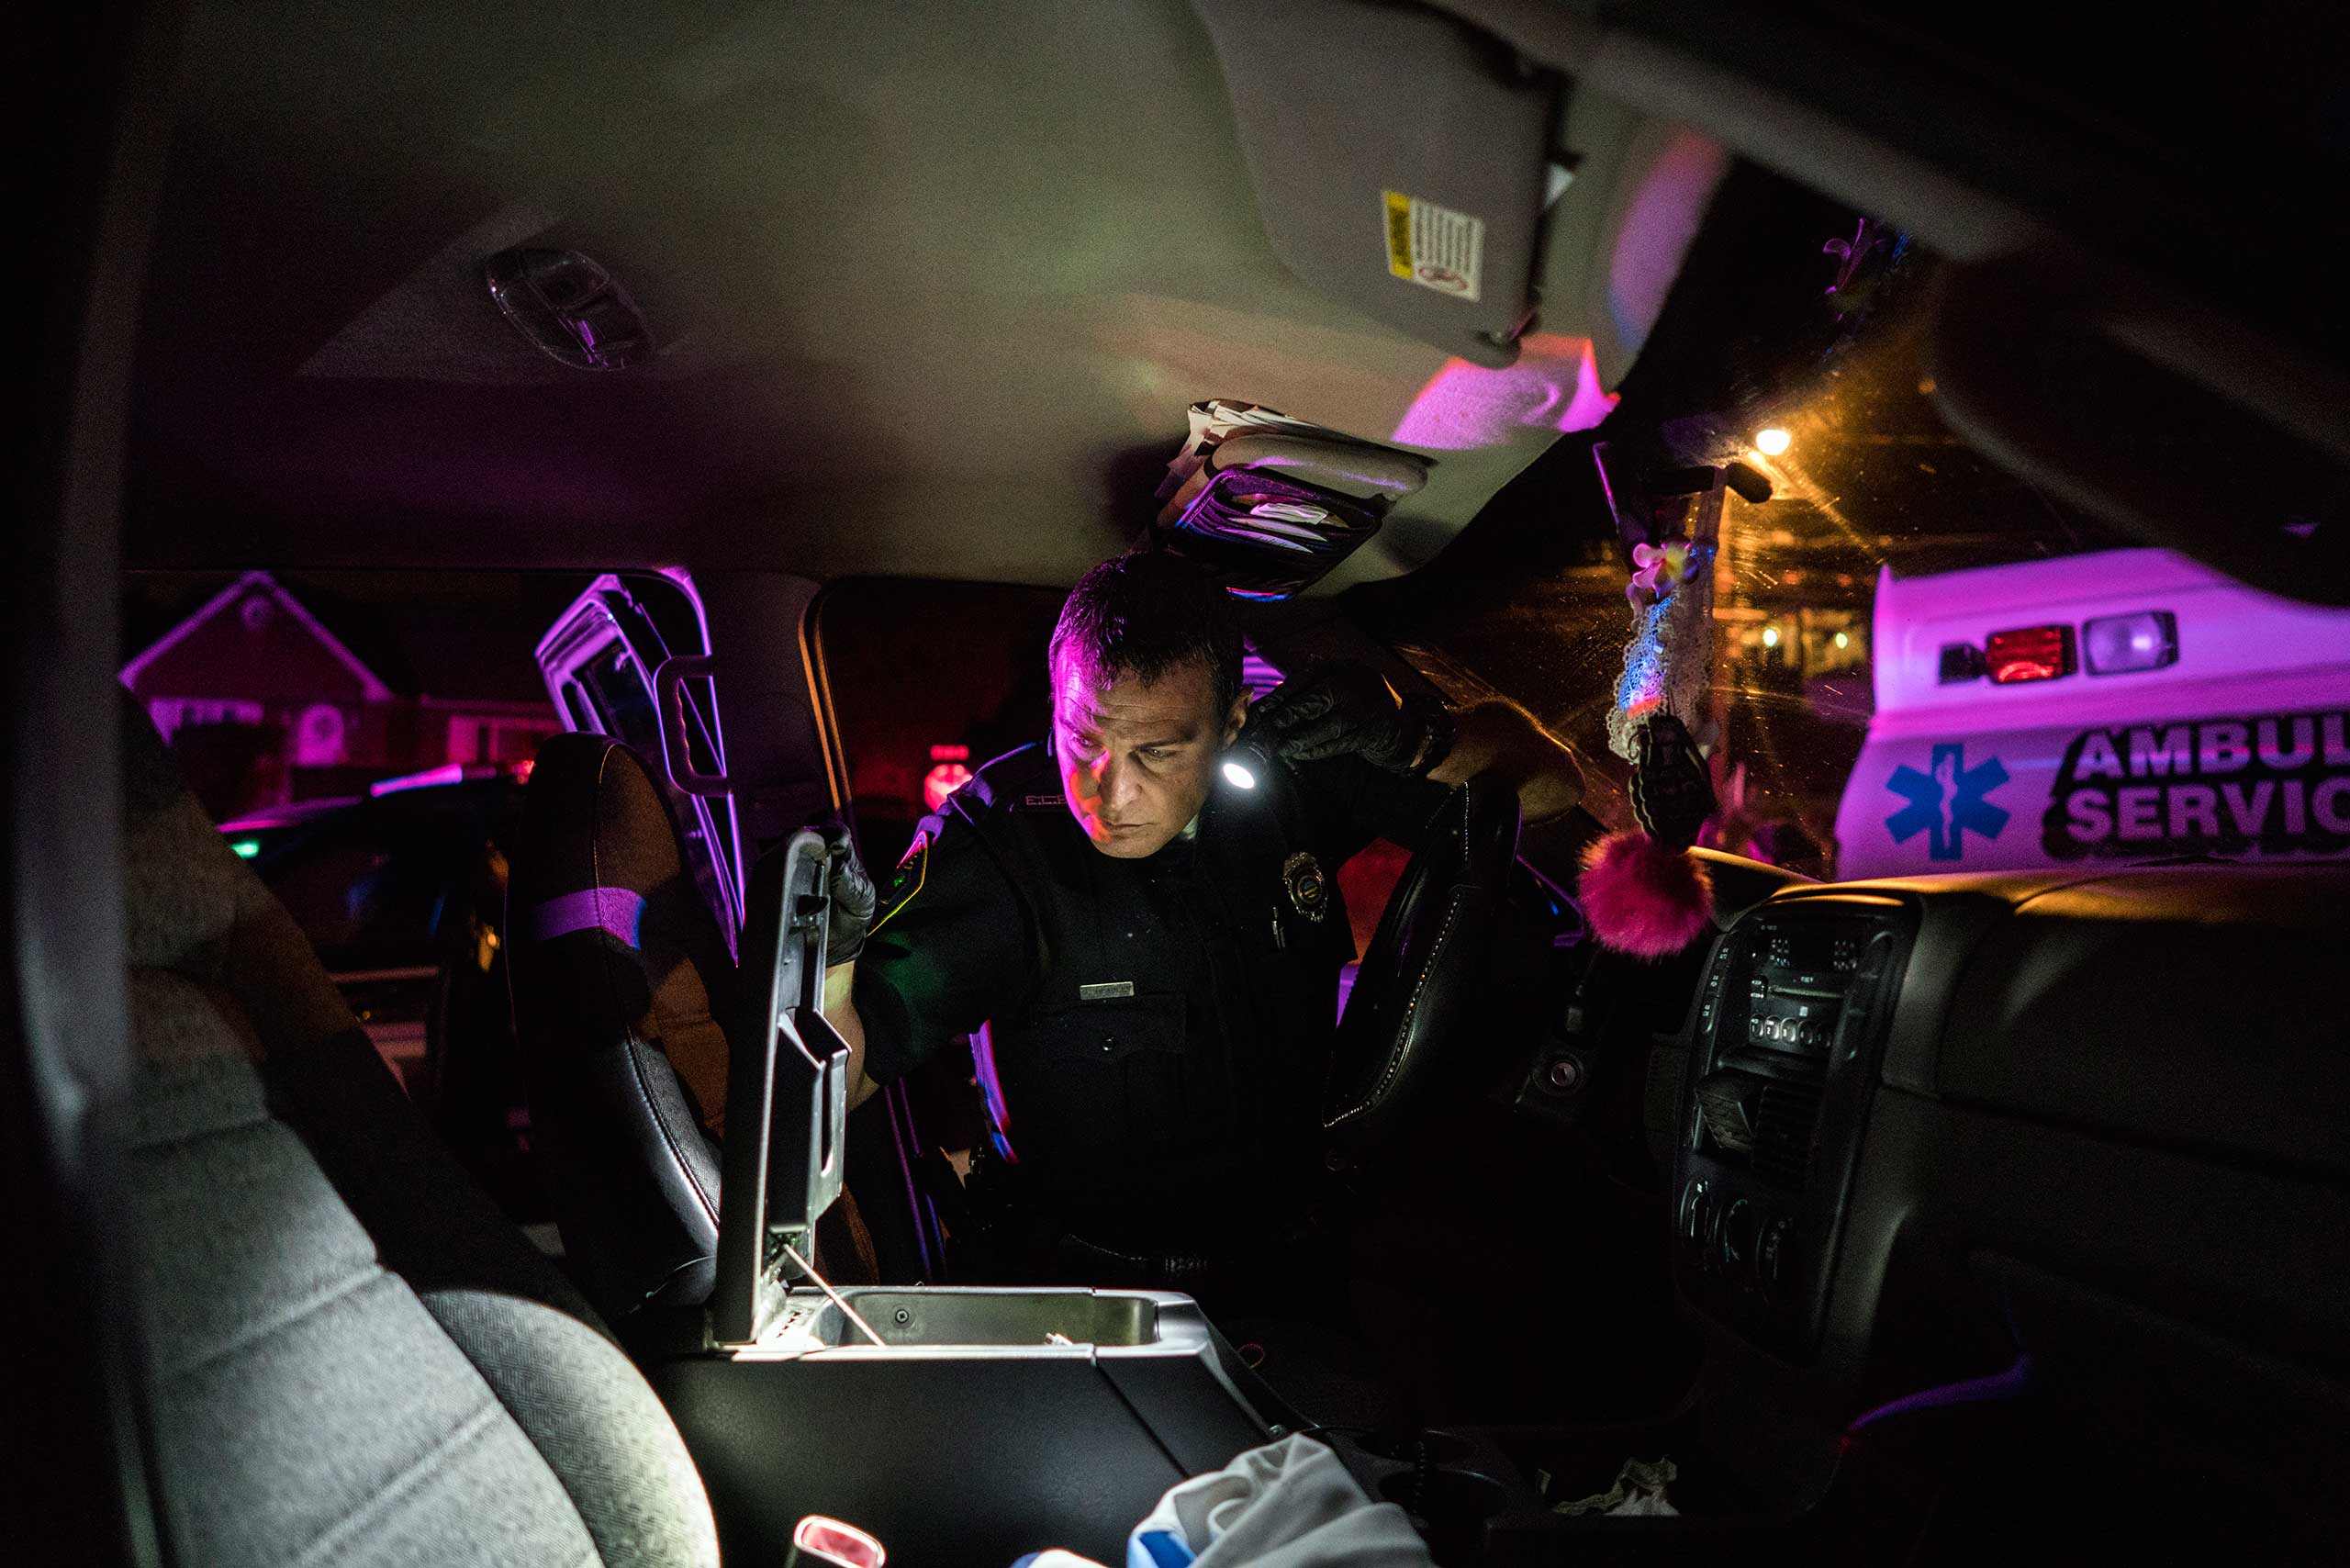 Patrolman John Headly searches through the car of a young man arrested for heroin possession in East Liverpool, Ohio, on Oct. 7, 2016. A small child safety seat was strapped into the back seat with a syringe nearby.